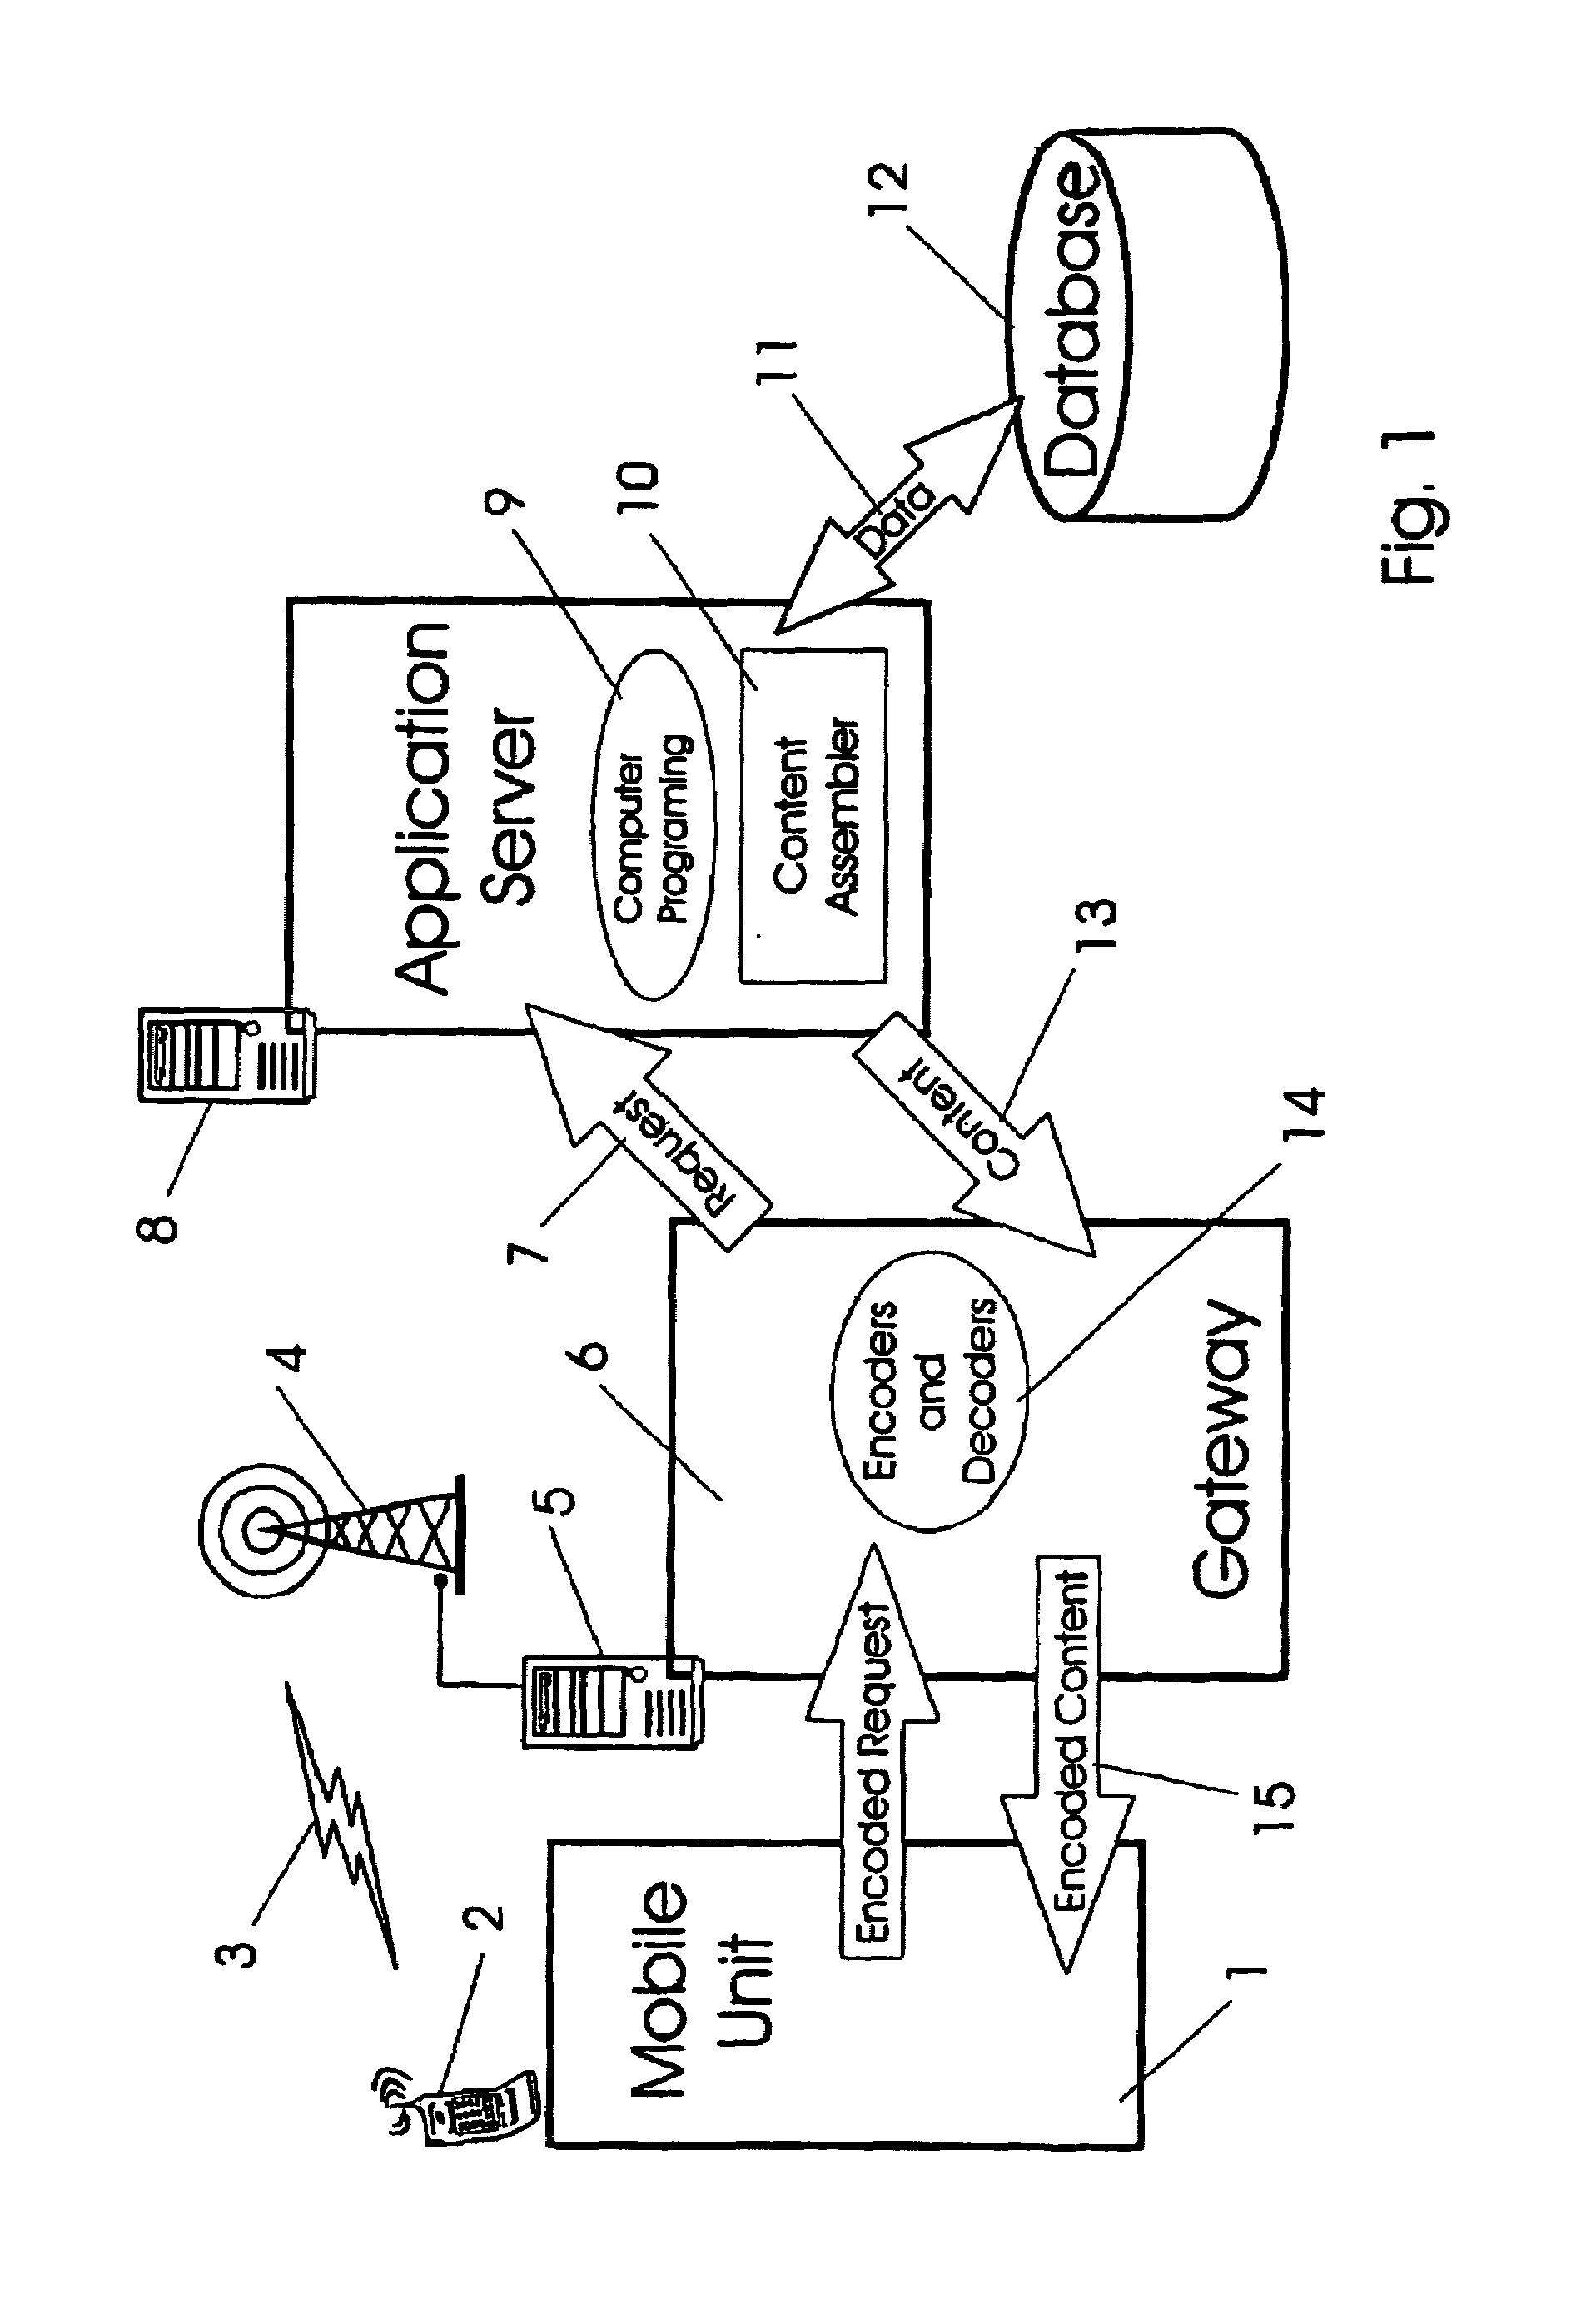 Pointing systems for addressing objects